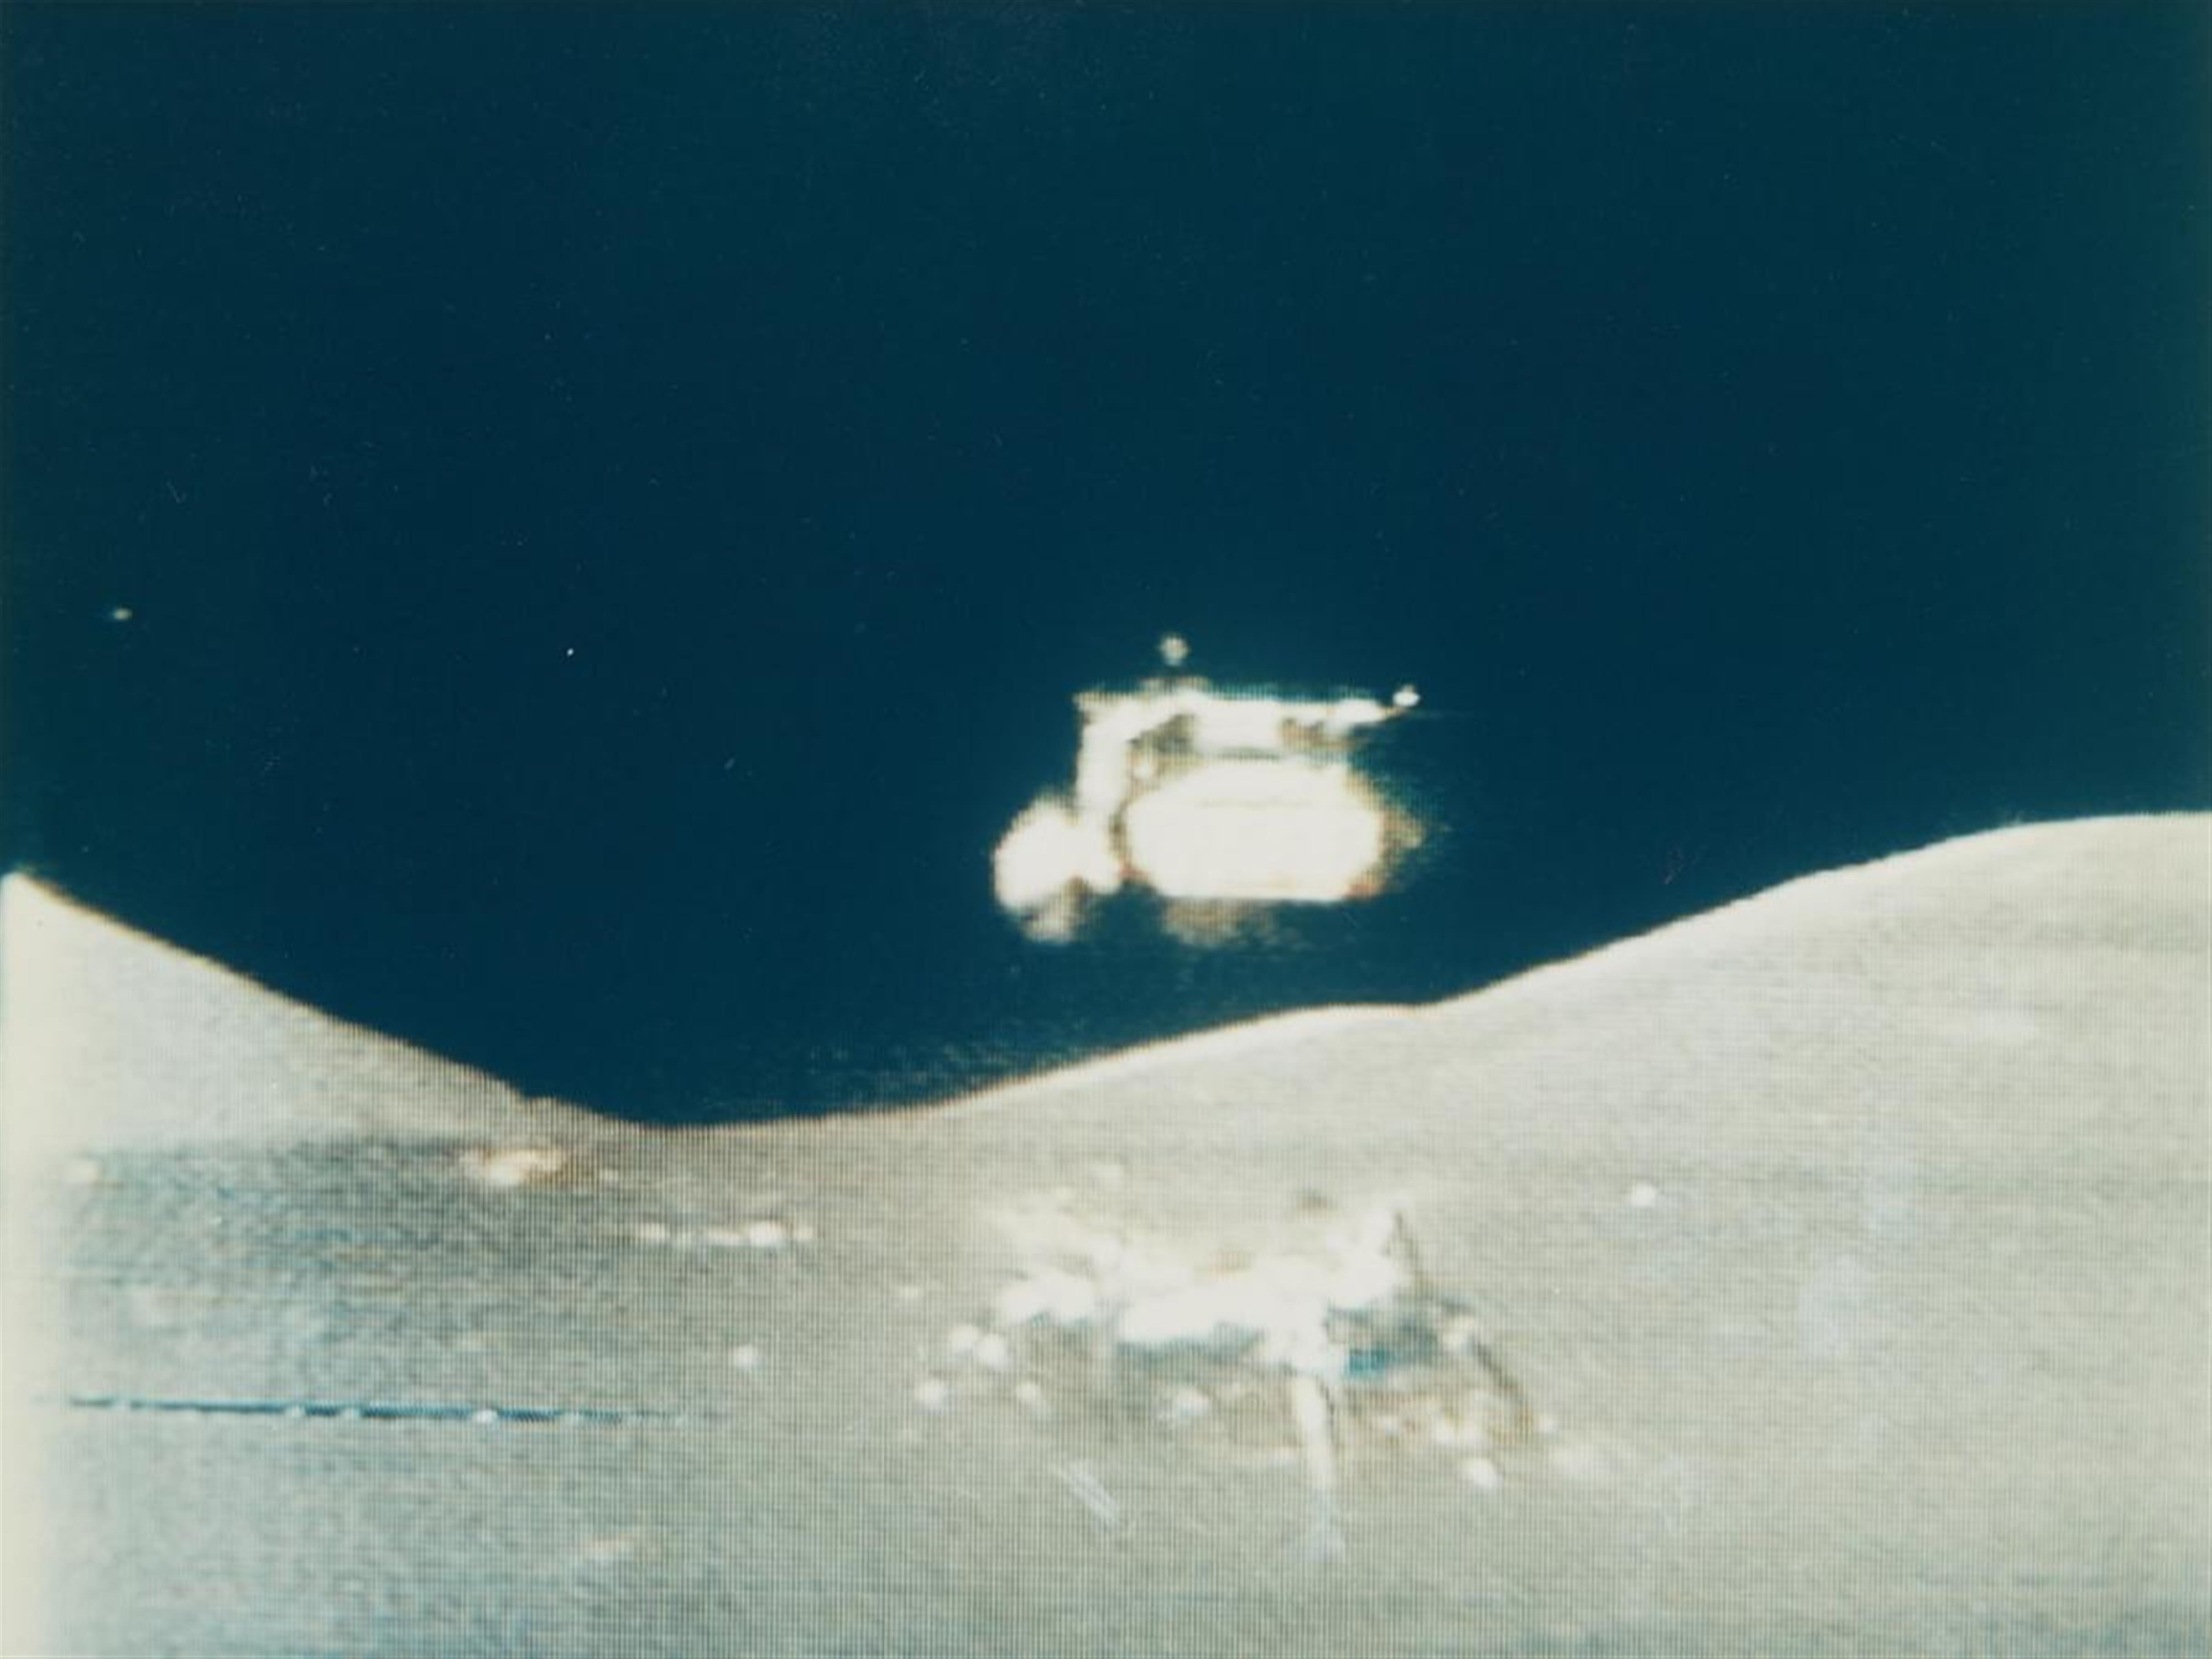 NASA - TV picture, Apollo 17: Lunar module "Challenger", liftoff from the lunar surface - image-1